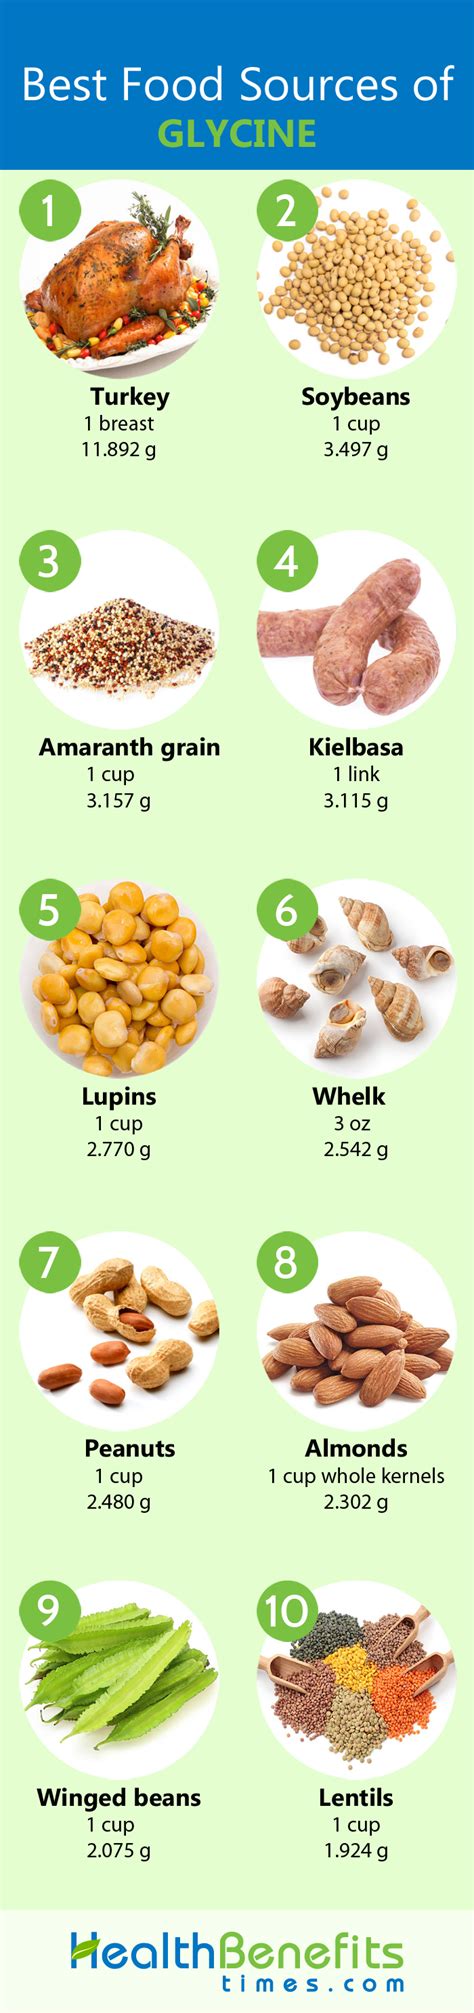 <b>Glycine</b> is the smallest and simplest amino acid, making it versatile for use in a wide range of functions. . Top 10 foods highest in glycine